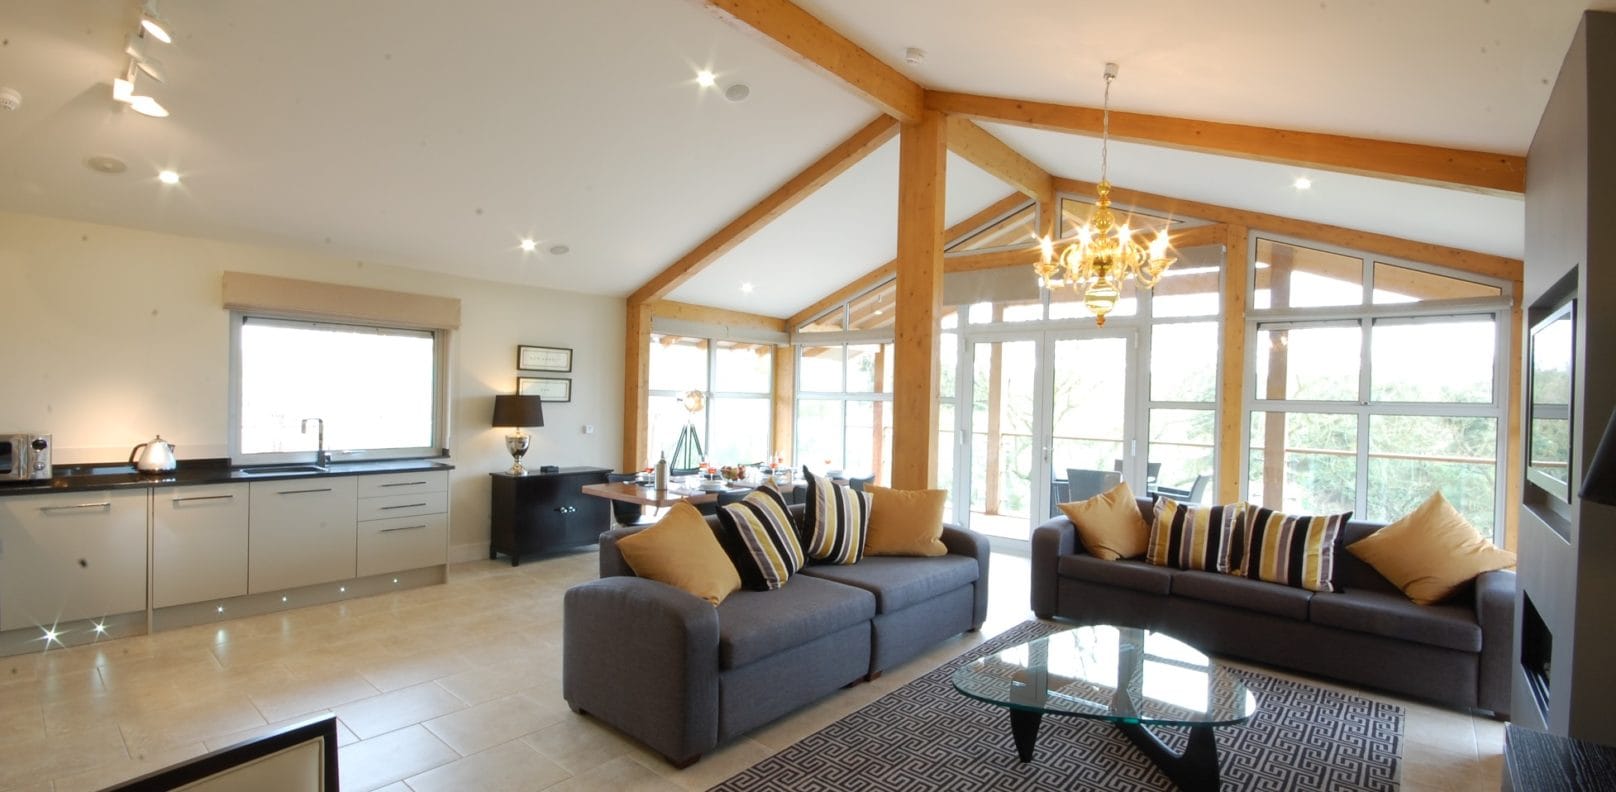 Self catering lodge living room - Stoke by Nayland